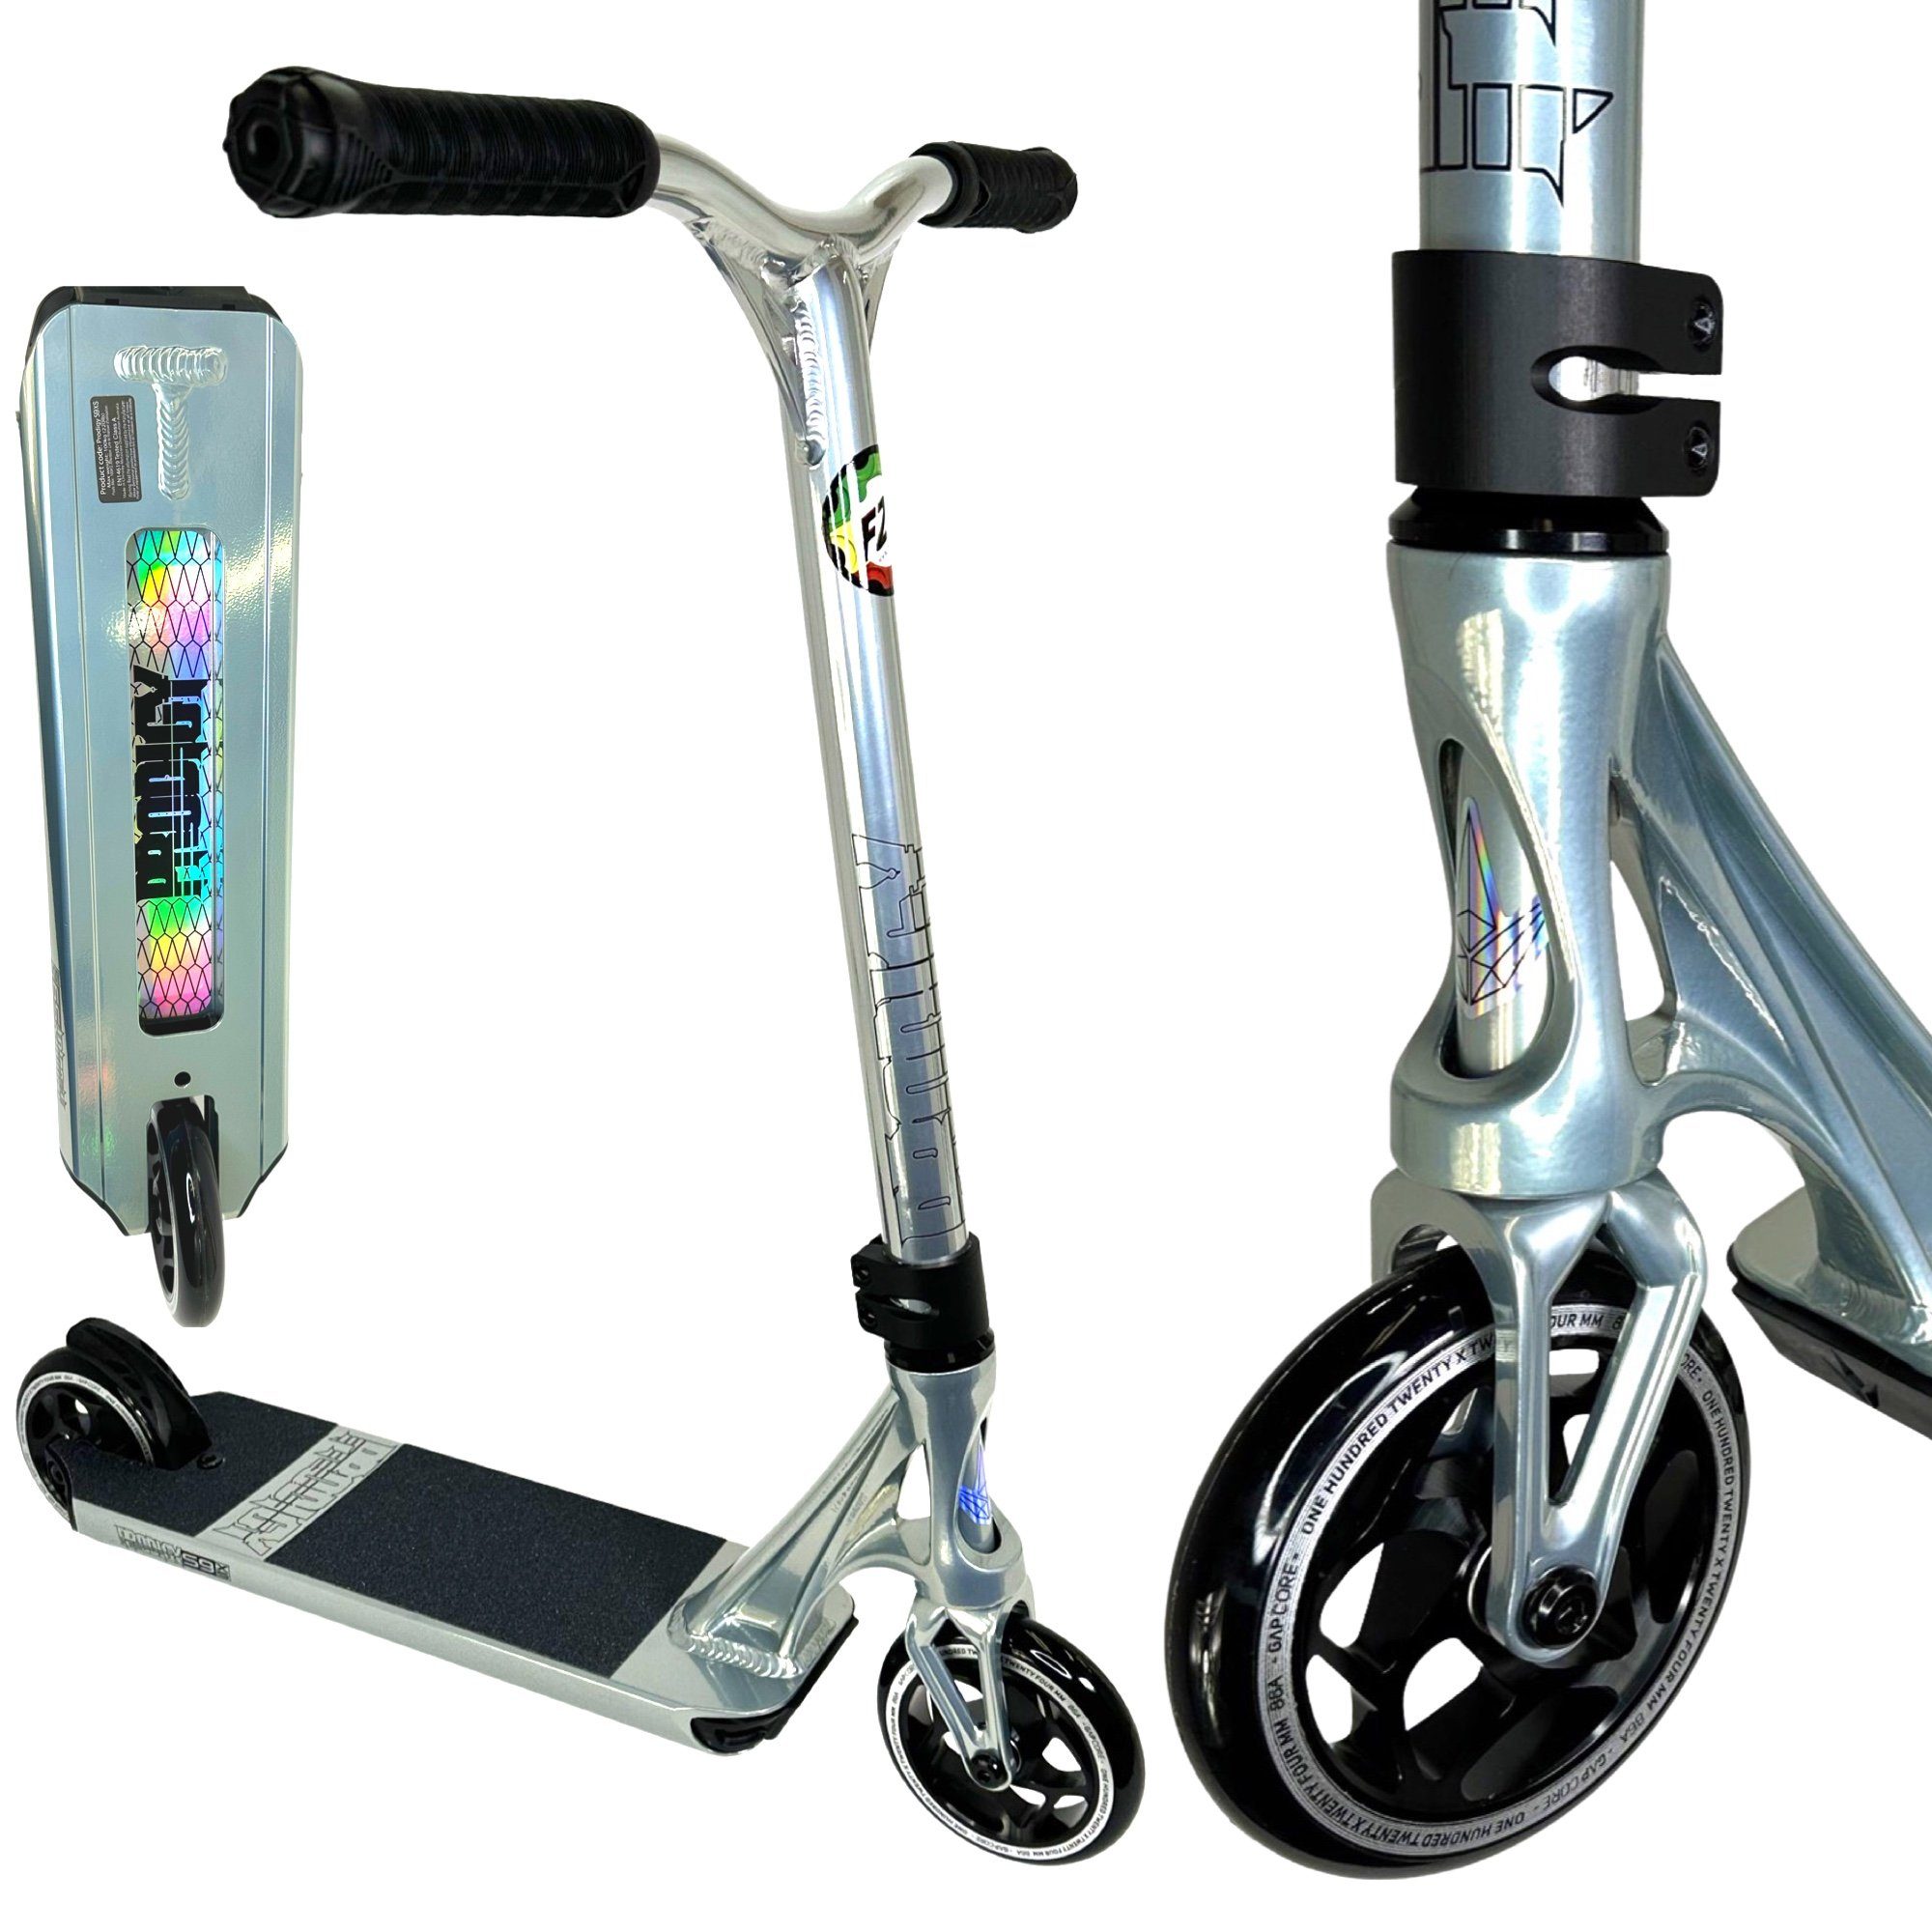 Stuntscooter Chrome Blunt S9 Park Stunt-Scooter Mini Complete H=70cm Prodigy Blunt